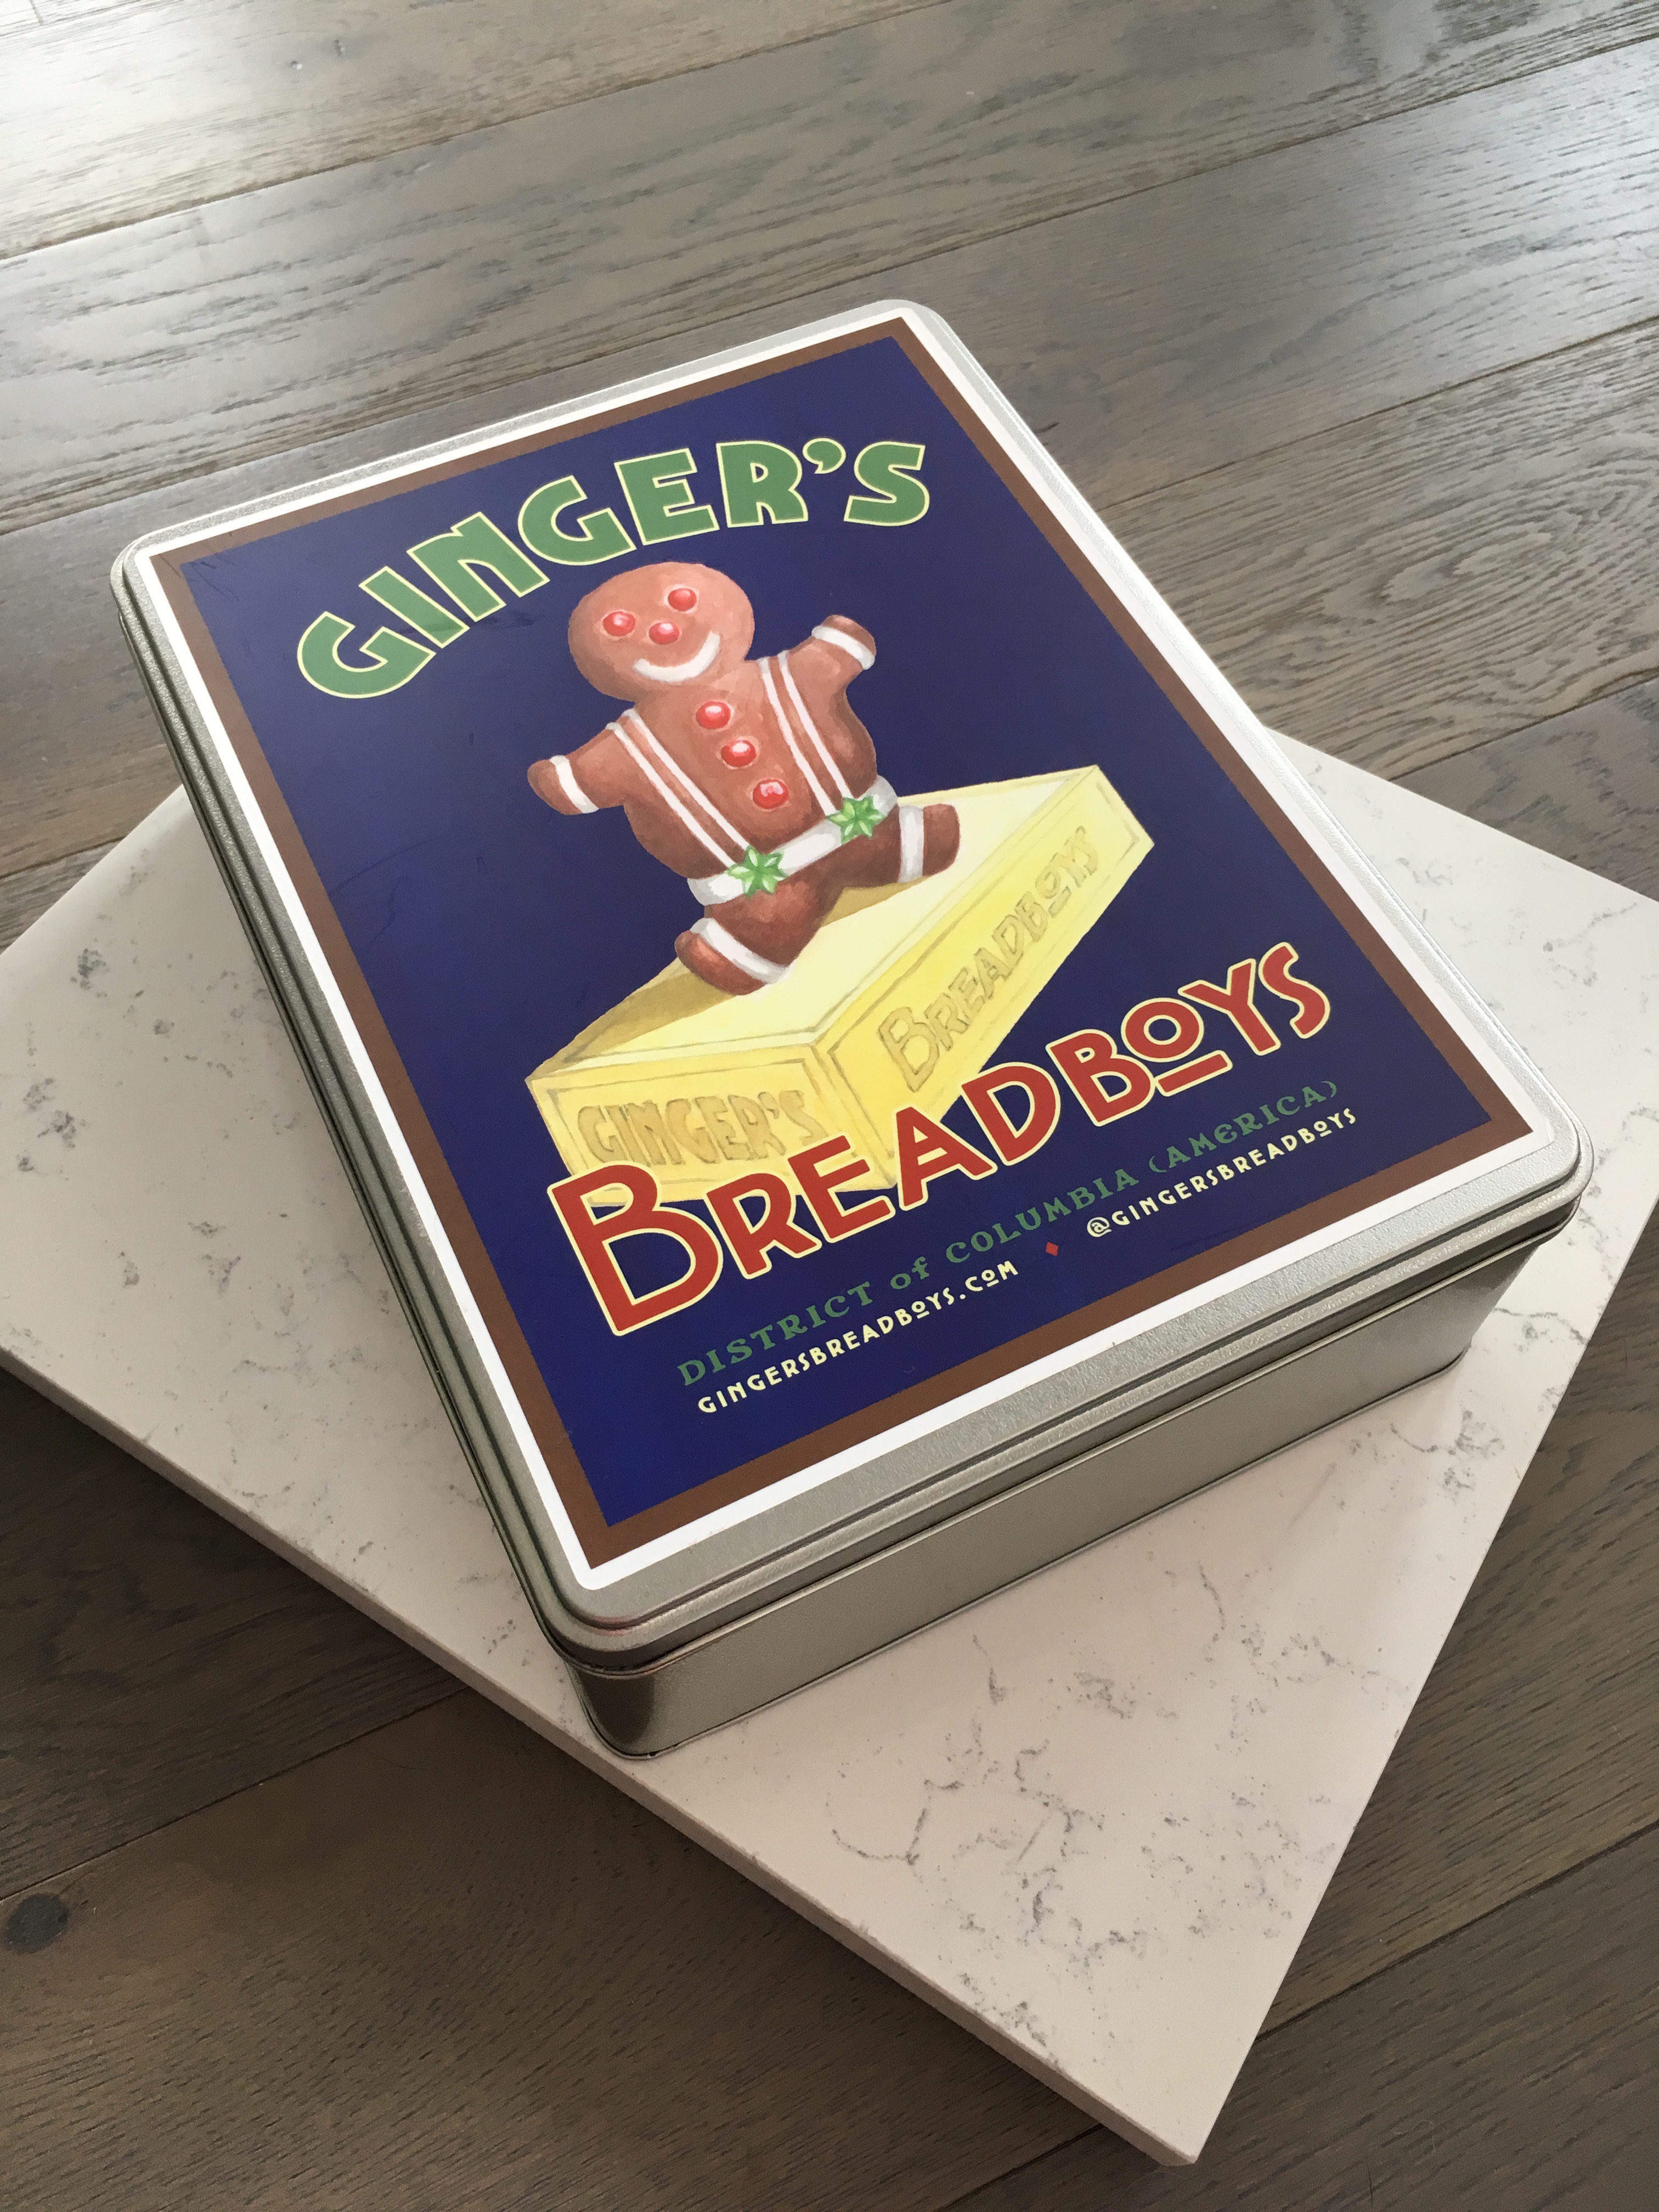 Gingerbread Cookie Kits from Ginger's Breadboys